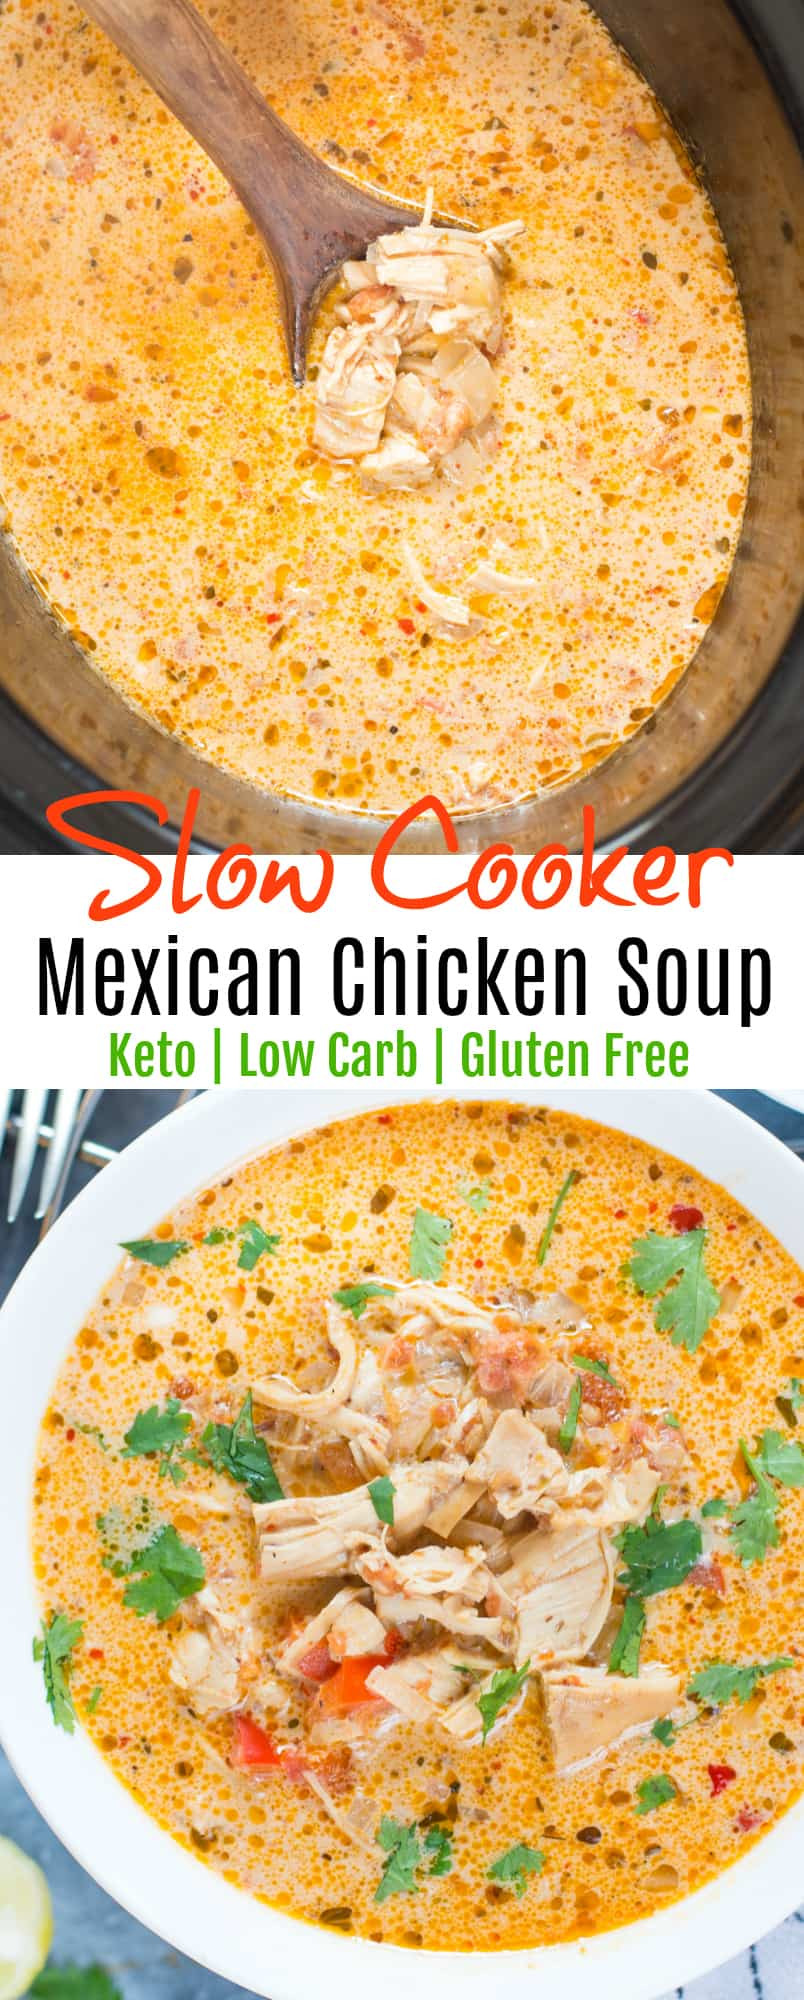 Keto Chicken Soup
 SLOW COOKER MEXICAN CHICKEN SOUP The flavours of kitchen